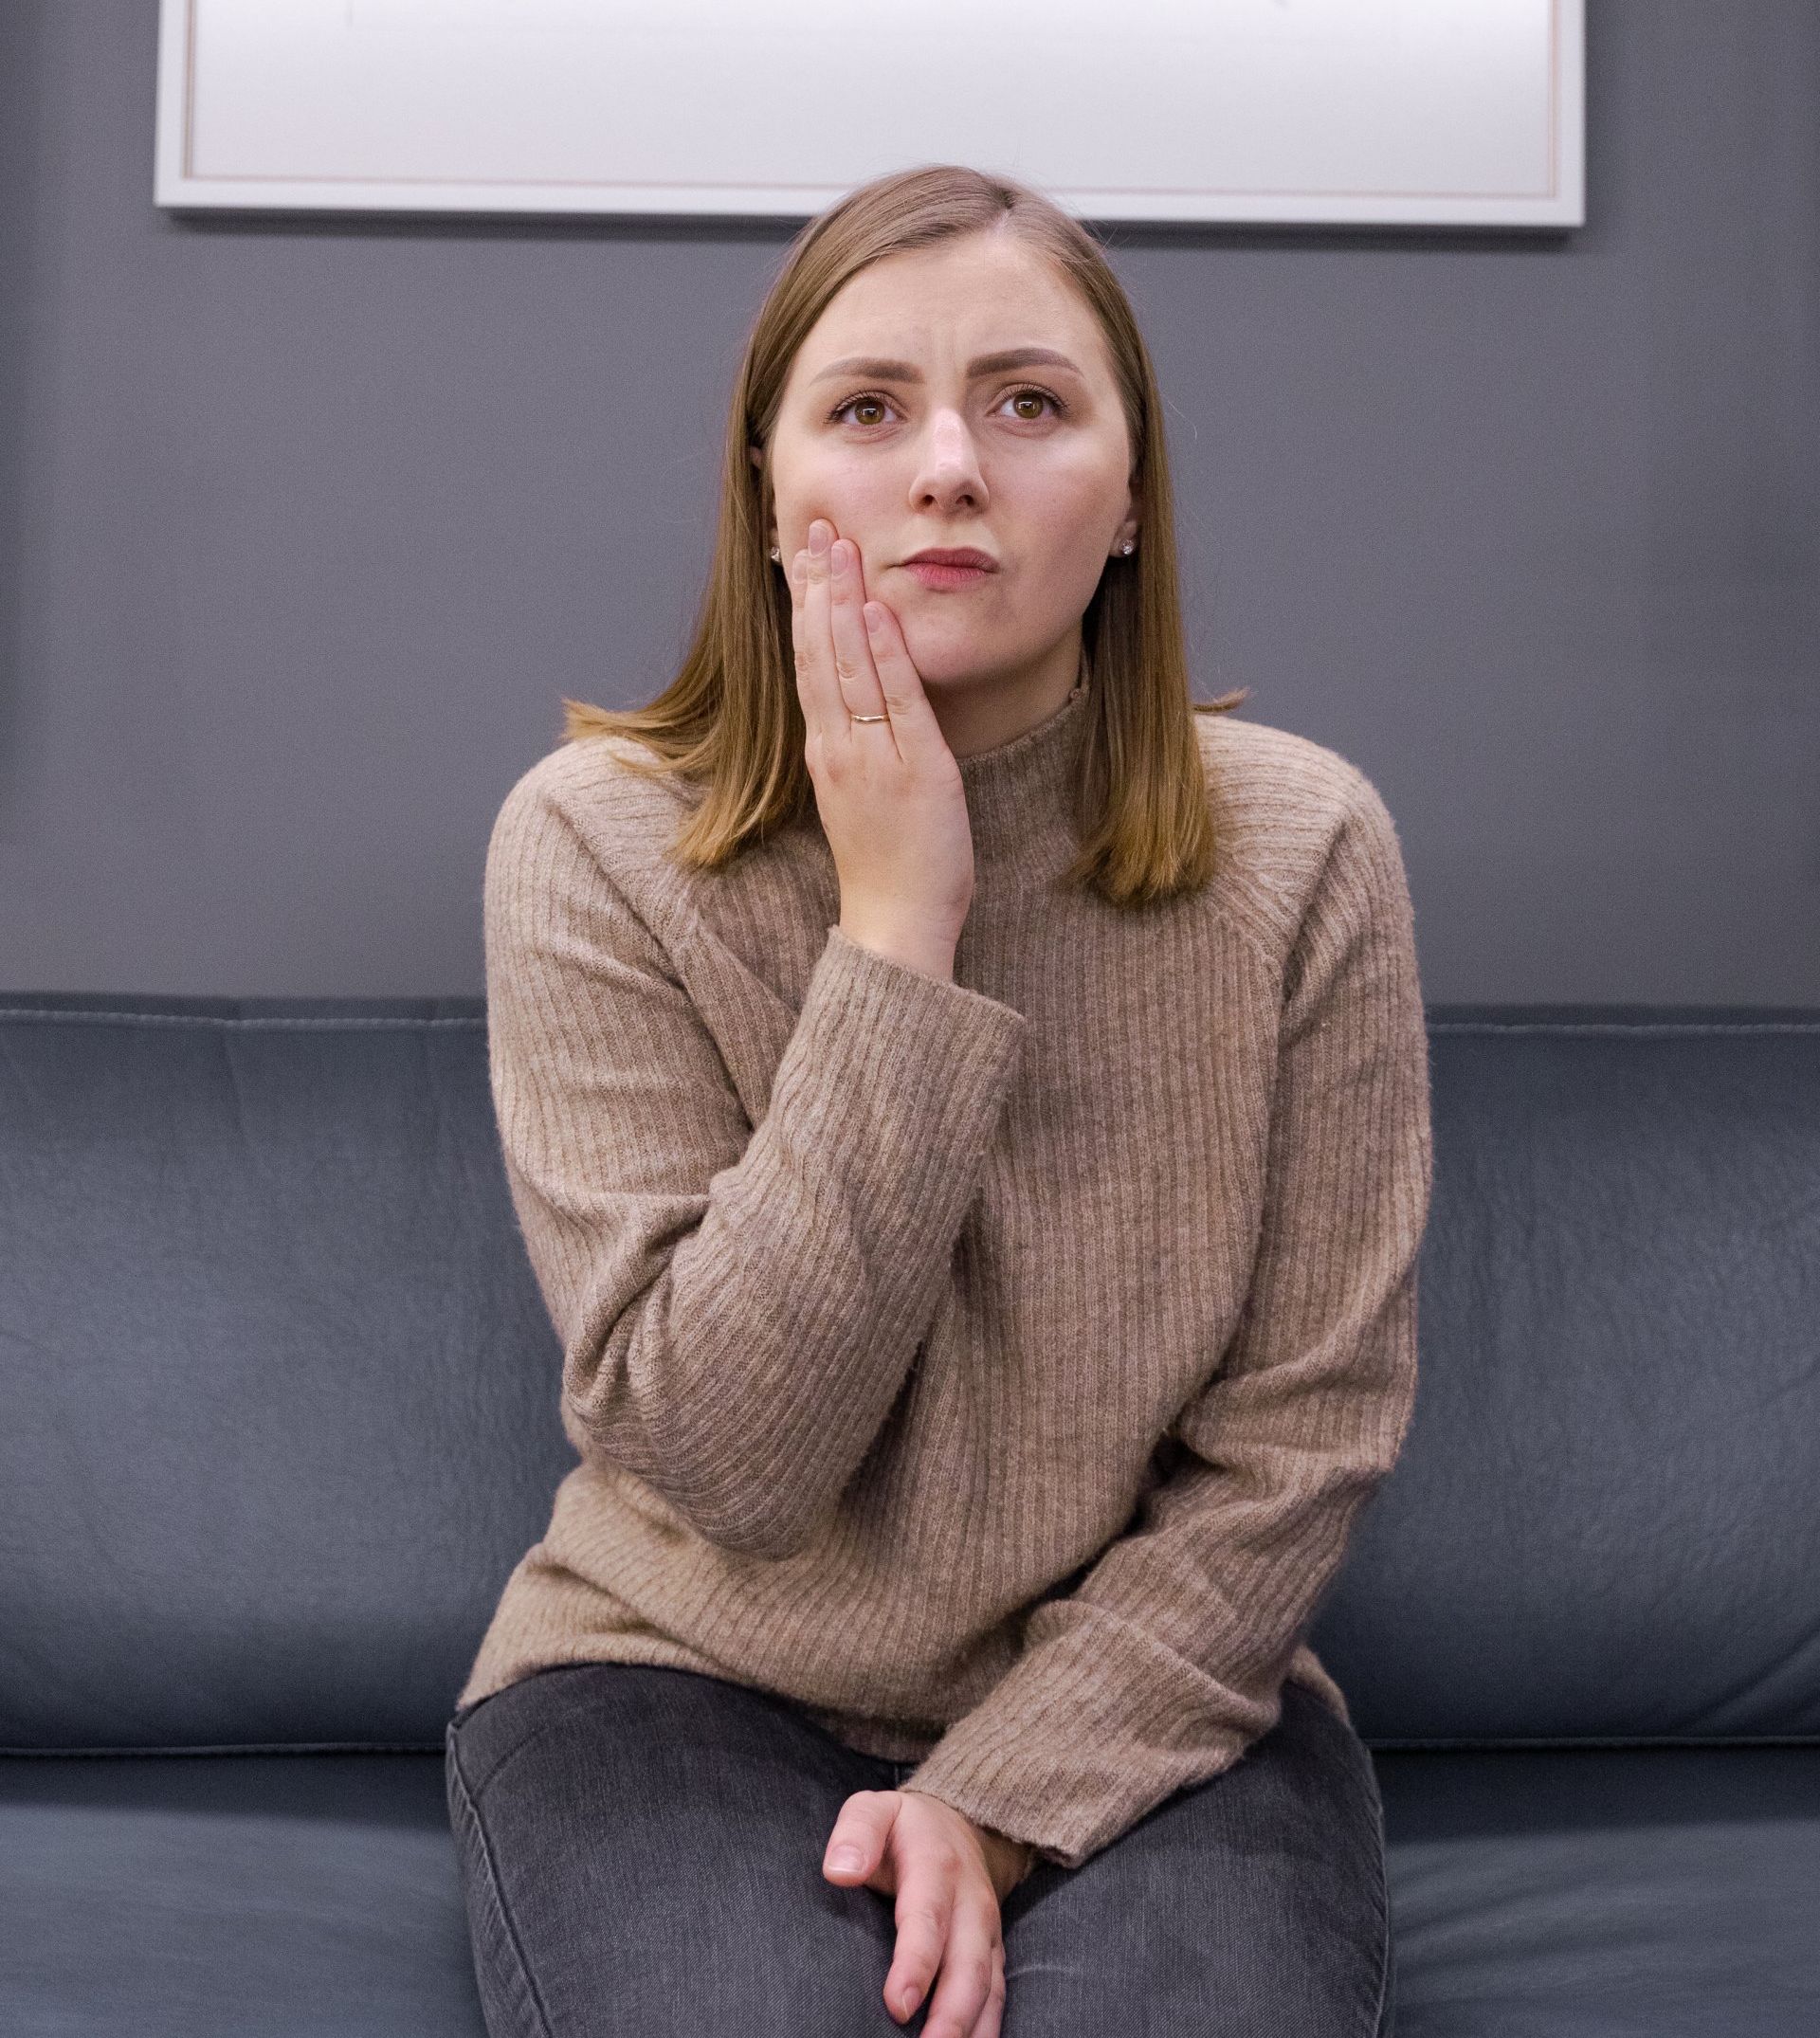 A woman is sitting on a couch with her hand on her face.